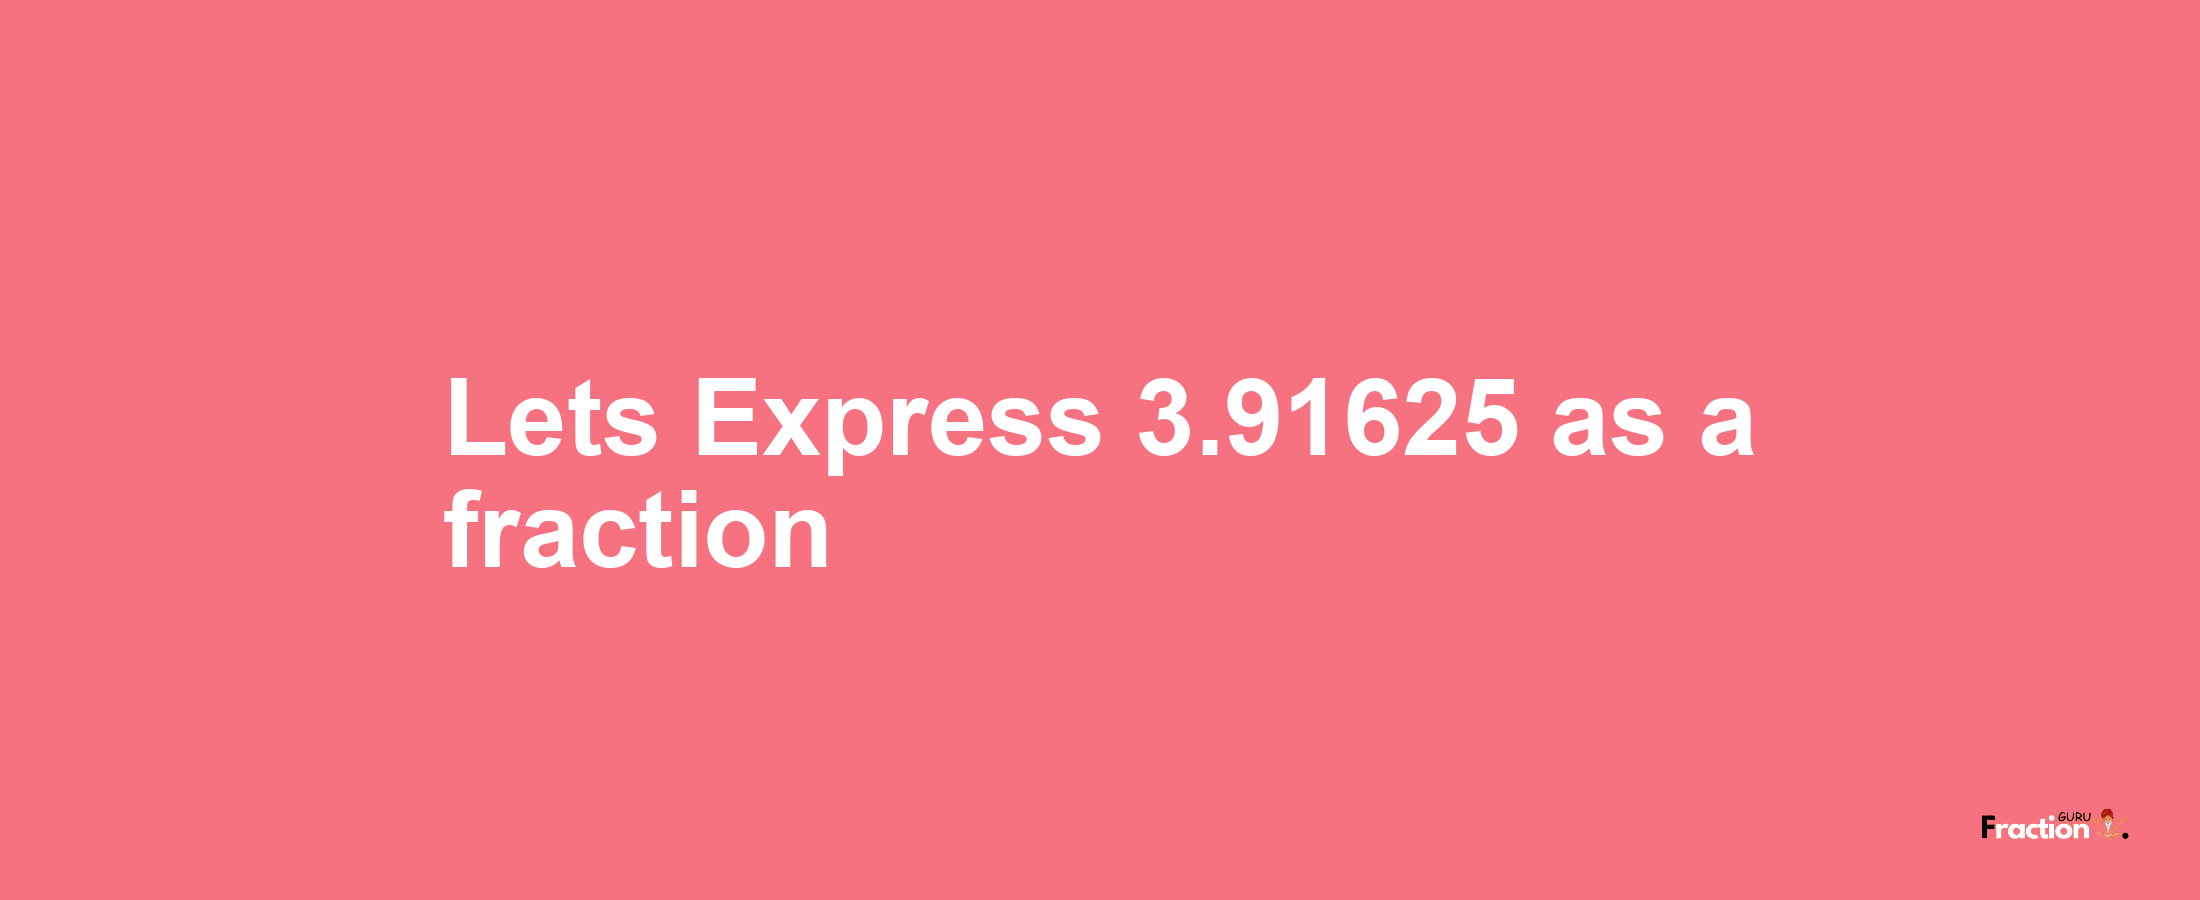 Lets Express 3.91625 as afraction